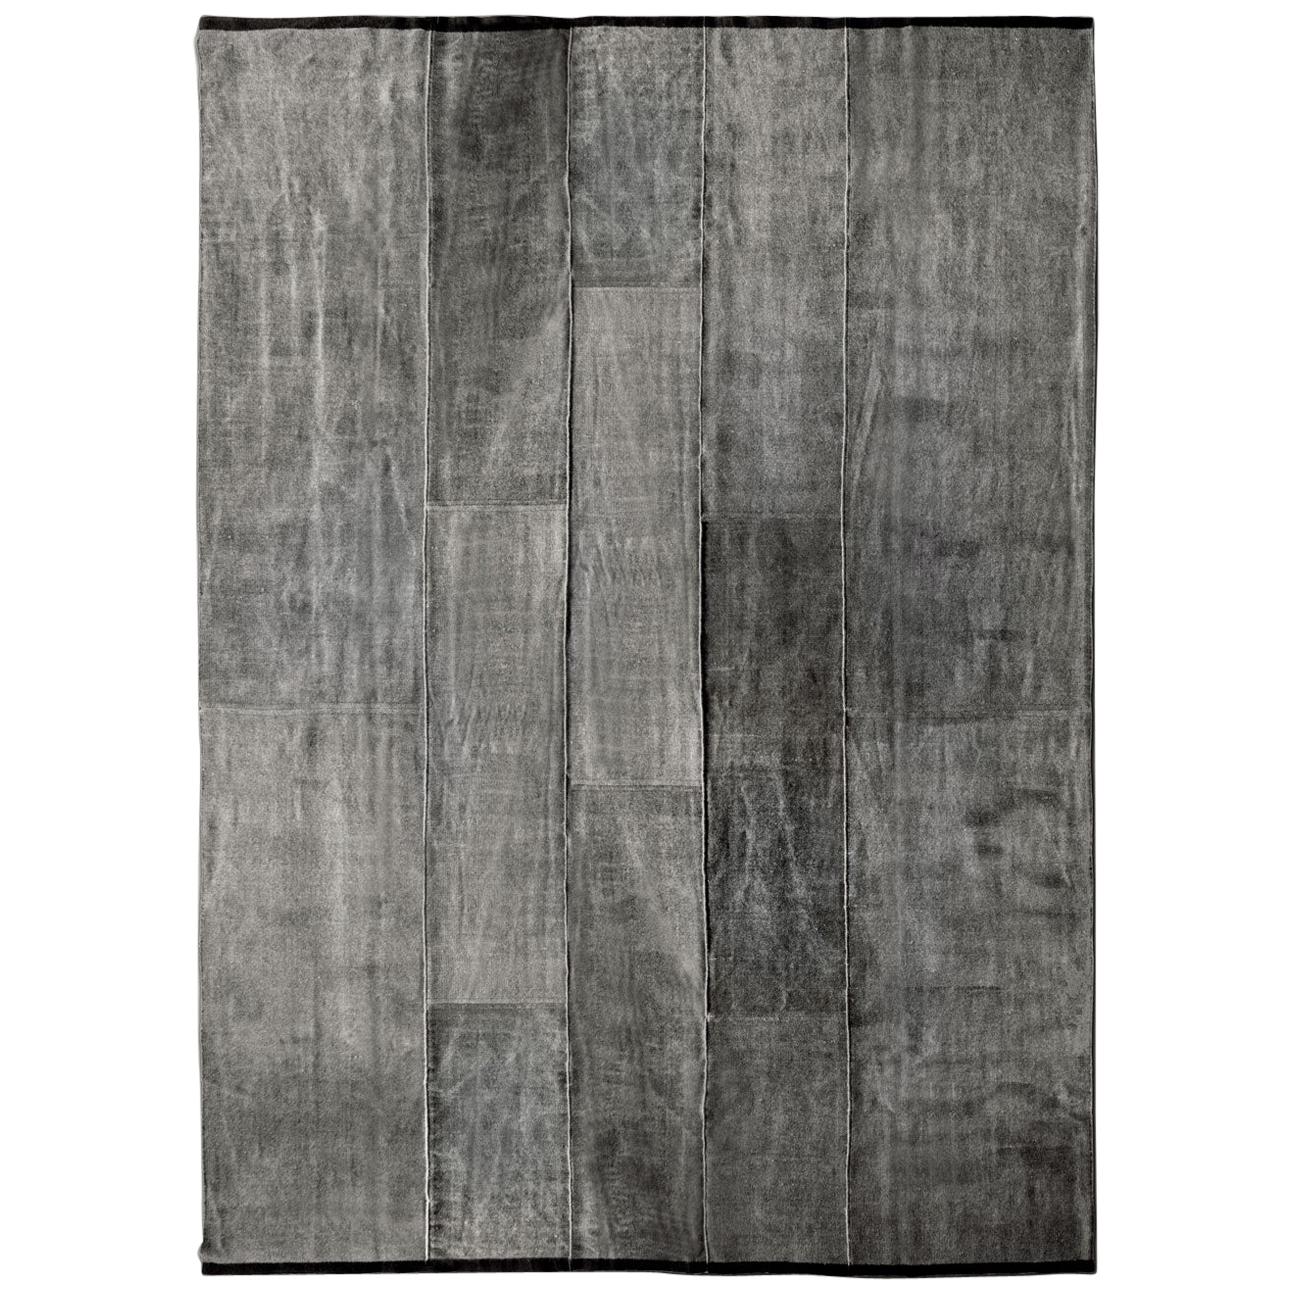 Contemporary Thin Light Natural Grey Wool Rug by Deanna Comellini 310x390 cm For Sale